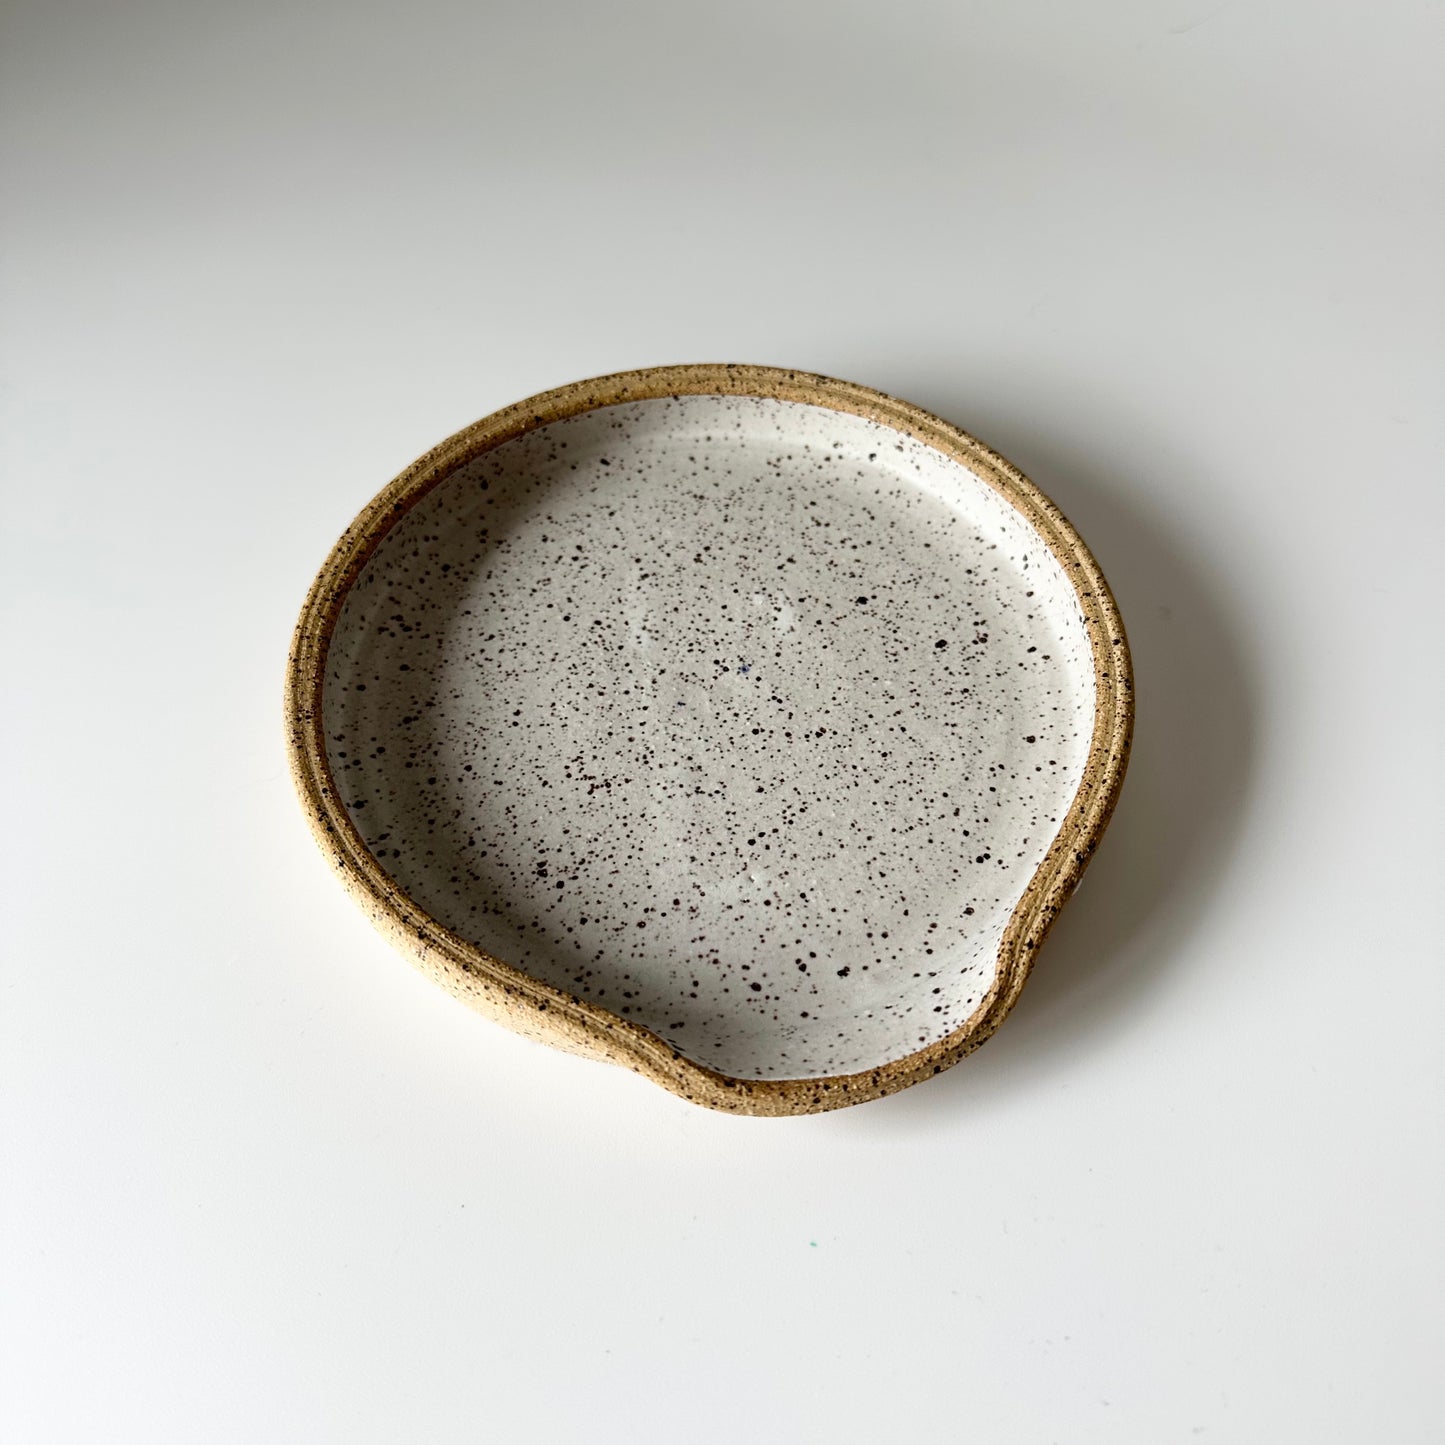 Spoon Rest | Tan & White Speckled